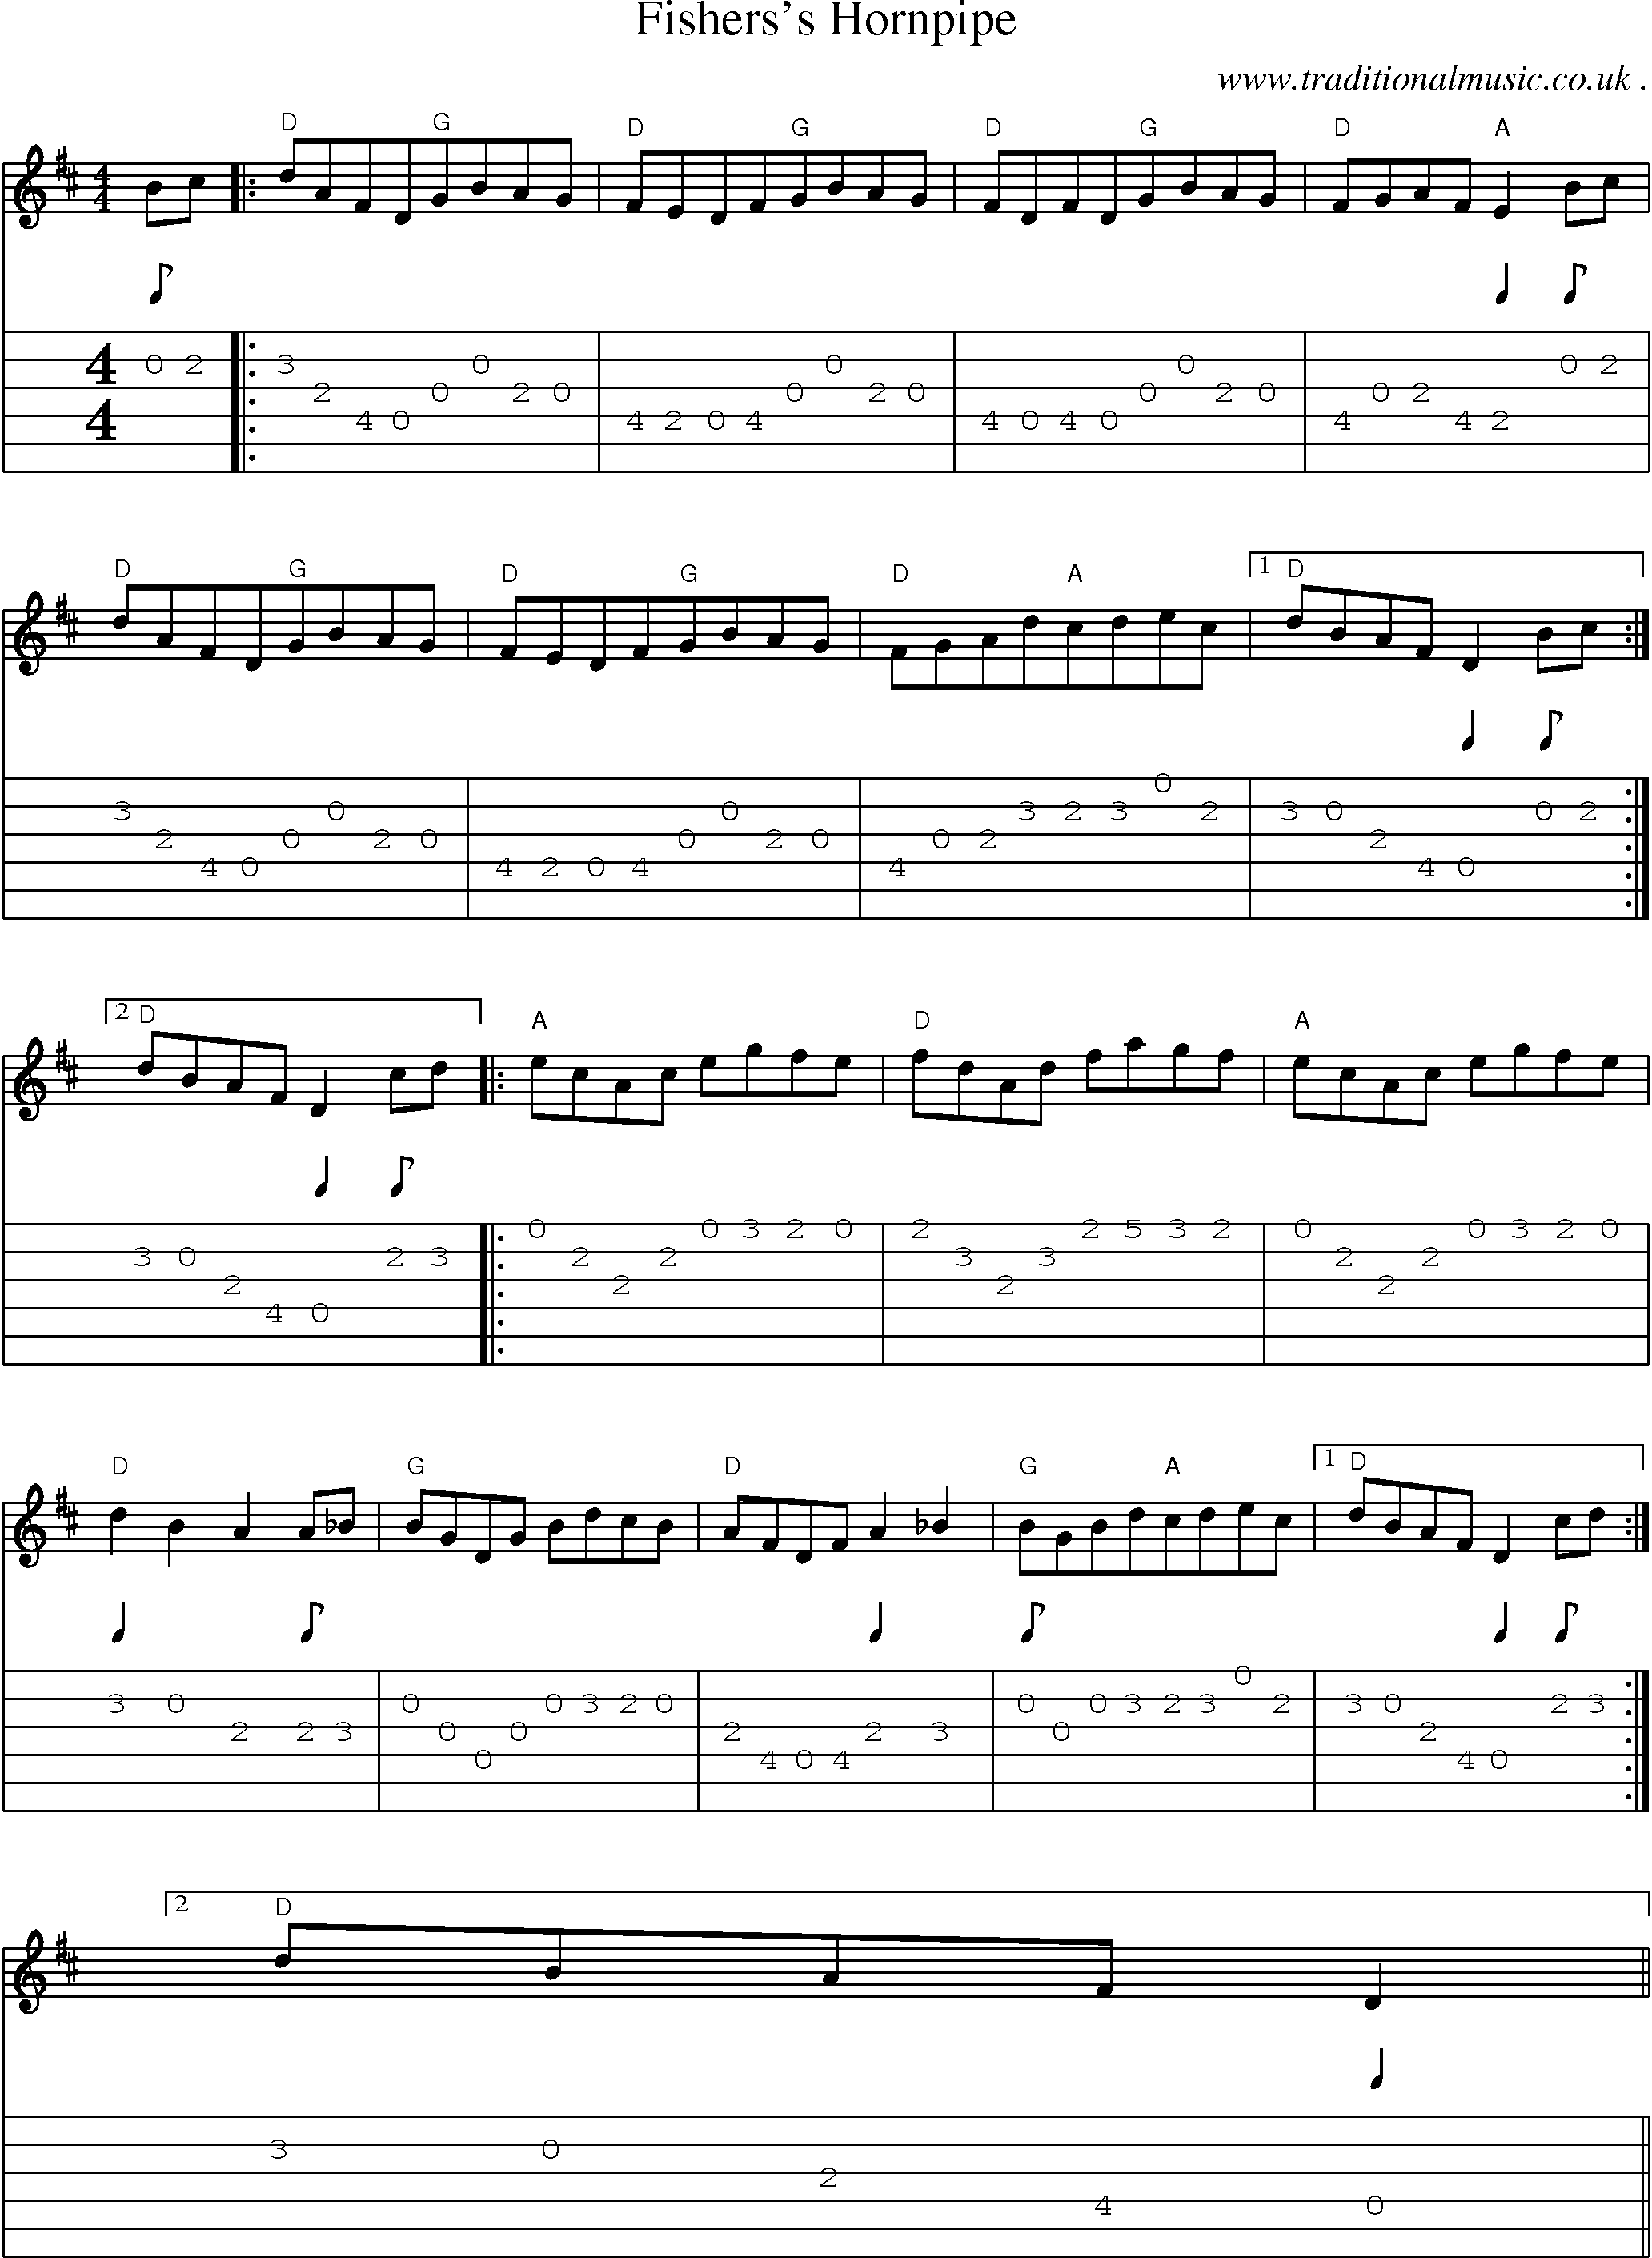 Sheet-Music and Guitar Tabs for Fisherss Hornpipe